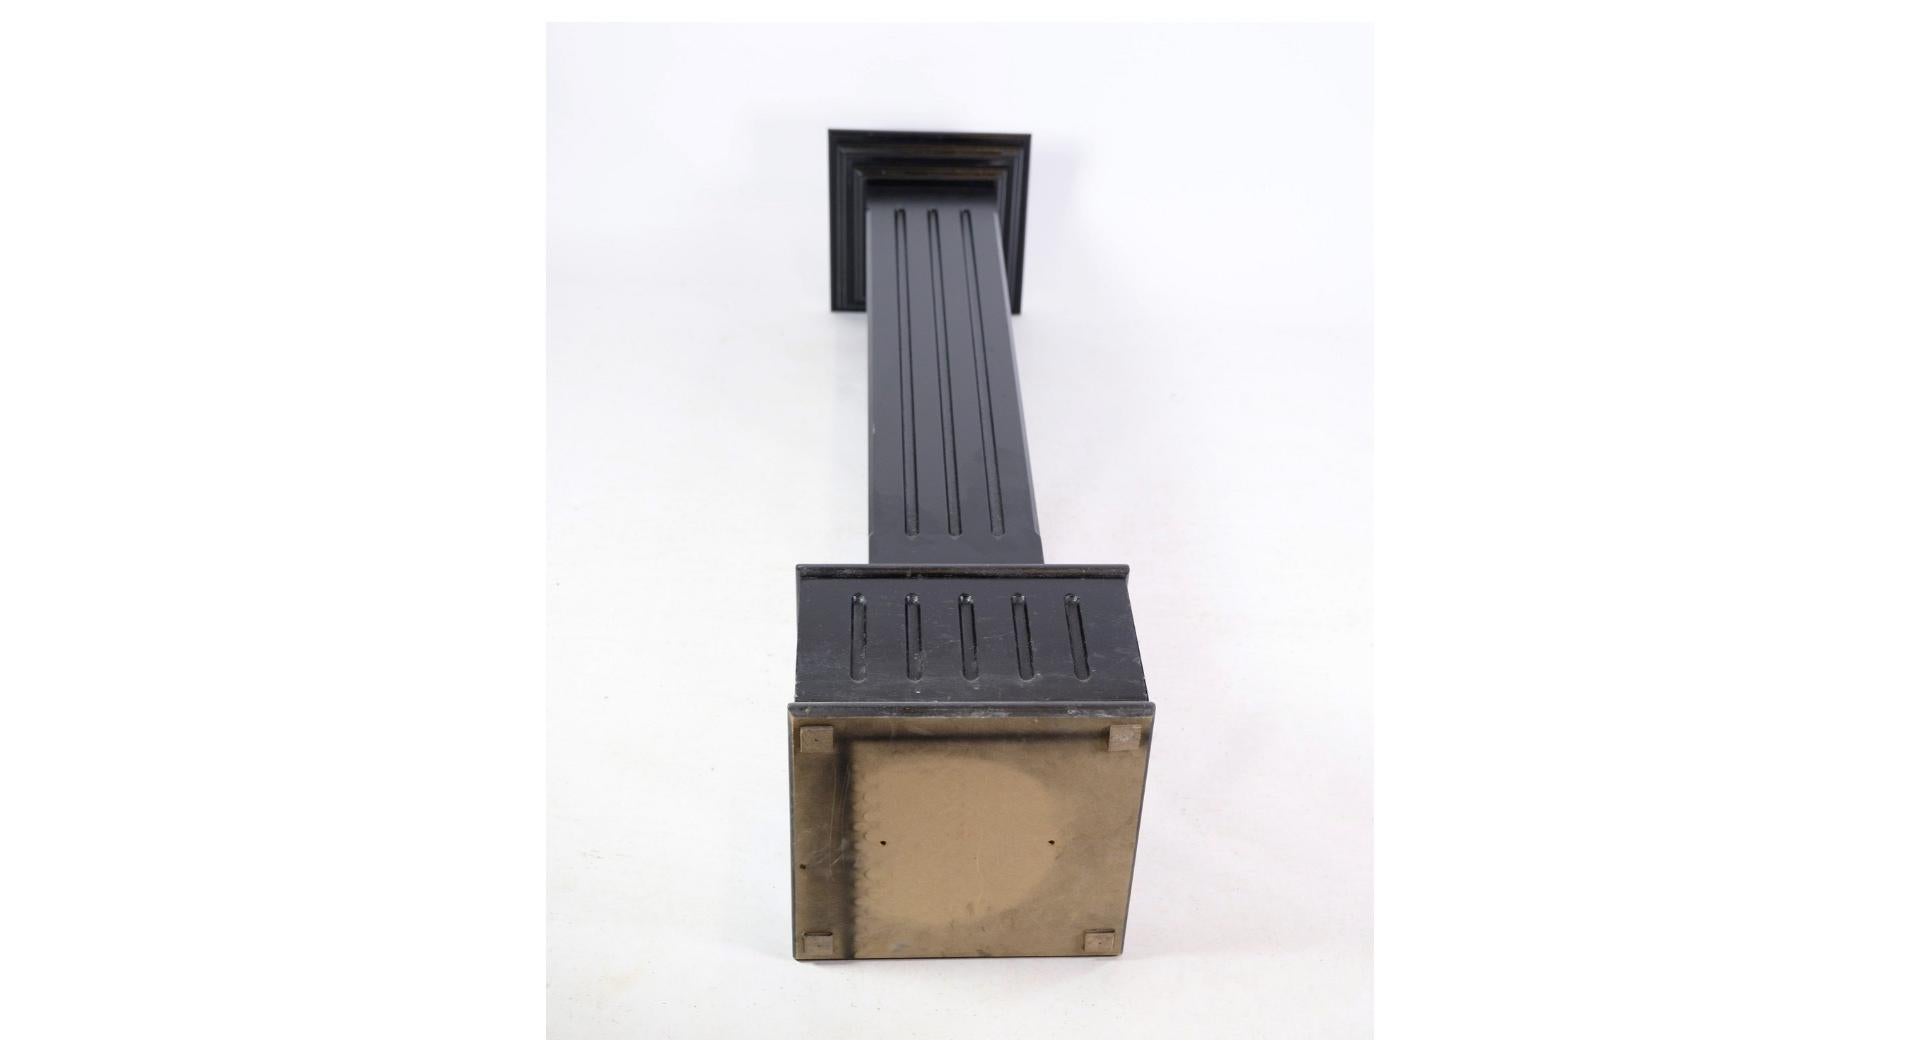 Late 20th Century Pedestals With Black Paint In Louis Seize Style From 1980s For Sale